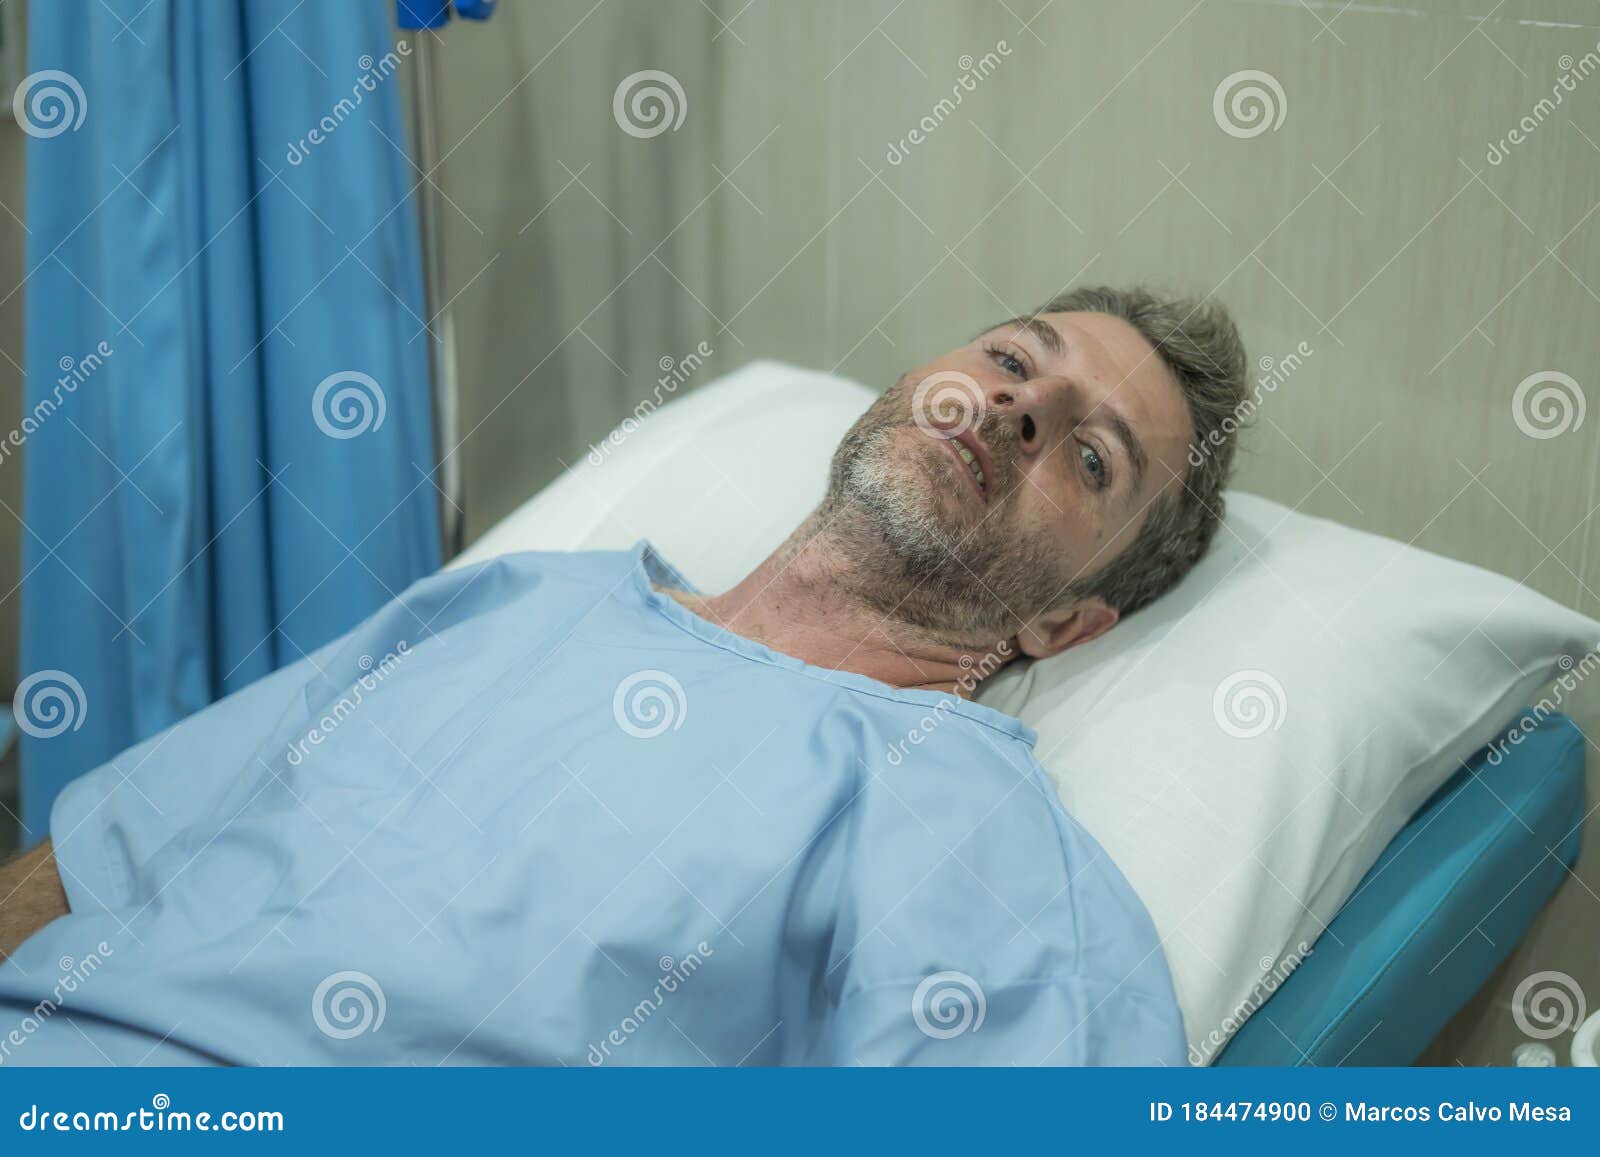 Attractive Injured Man Lying on Hospital Bed Receiving Treatment ...